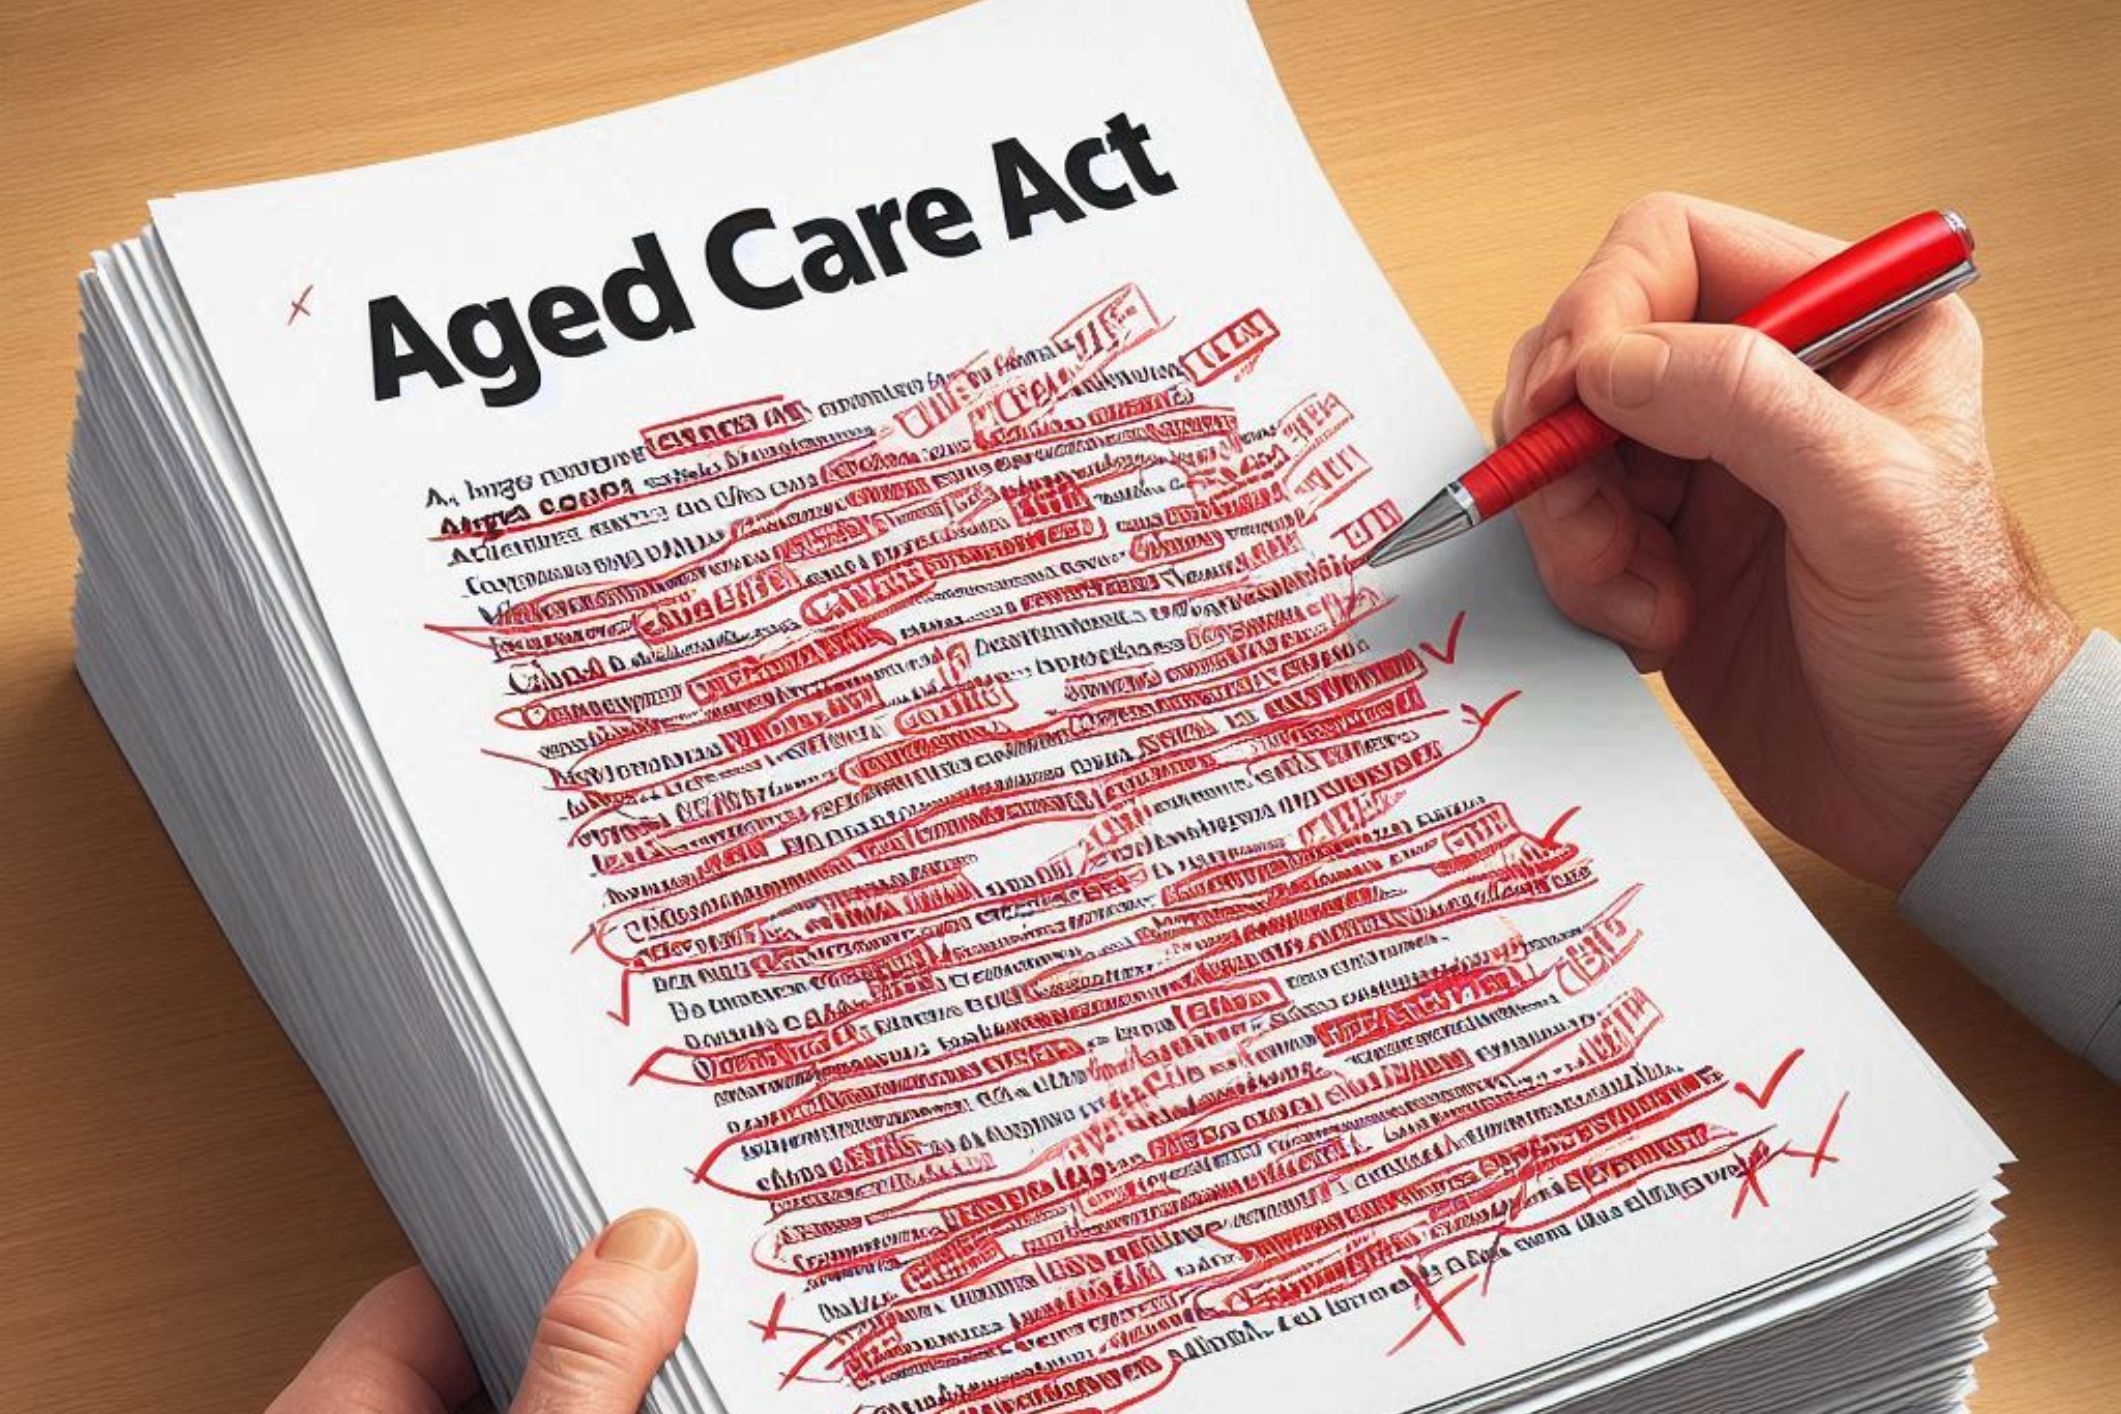 Aged Care Providers Raise Red Flags on Proposed Aged Care Act